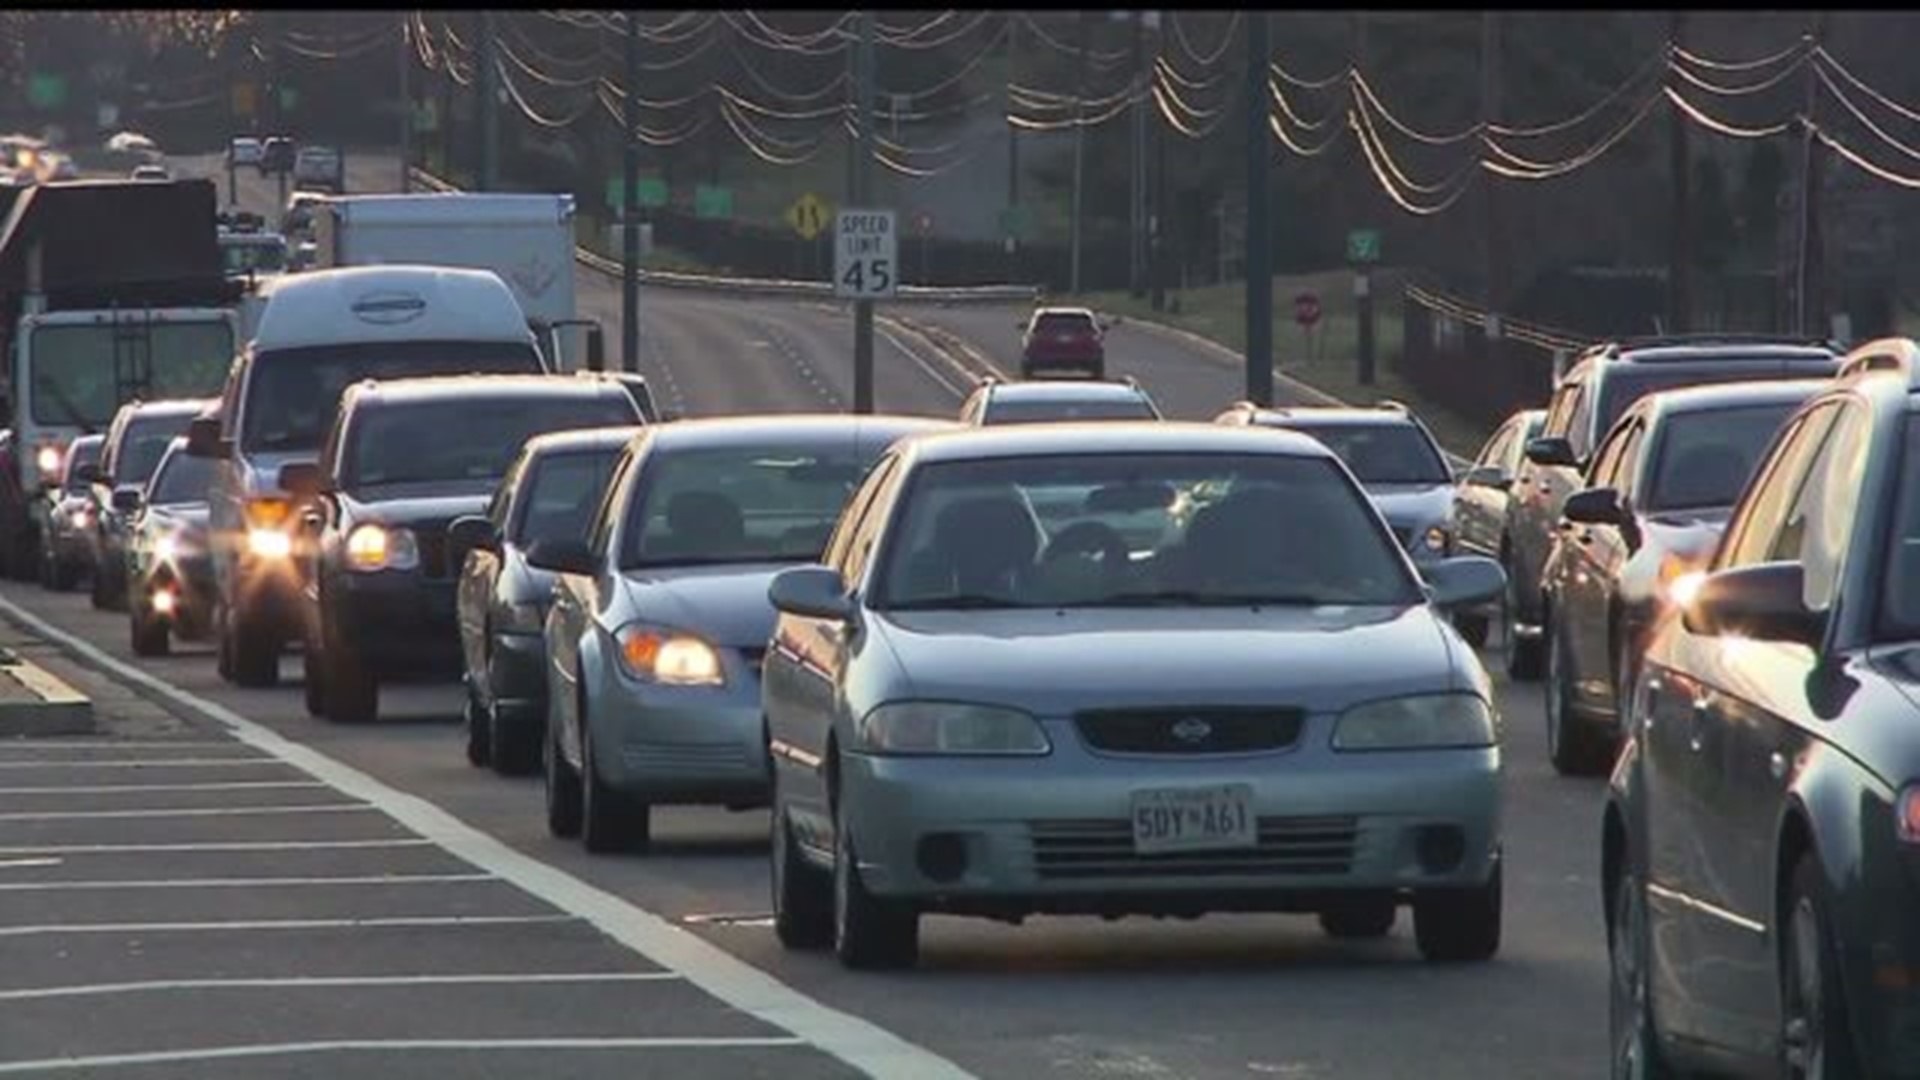 Triple A projects nearly 49 million Americans will travel more than 50 miles from home for Thanksgiving this year